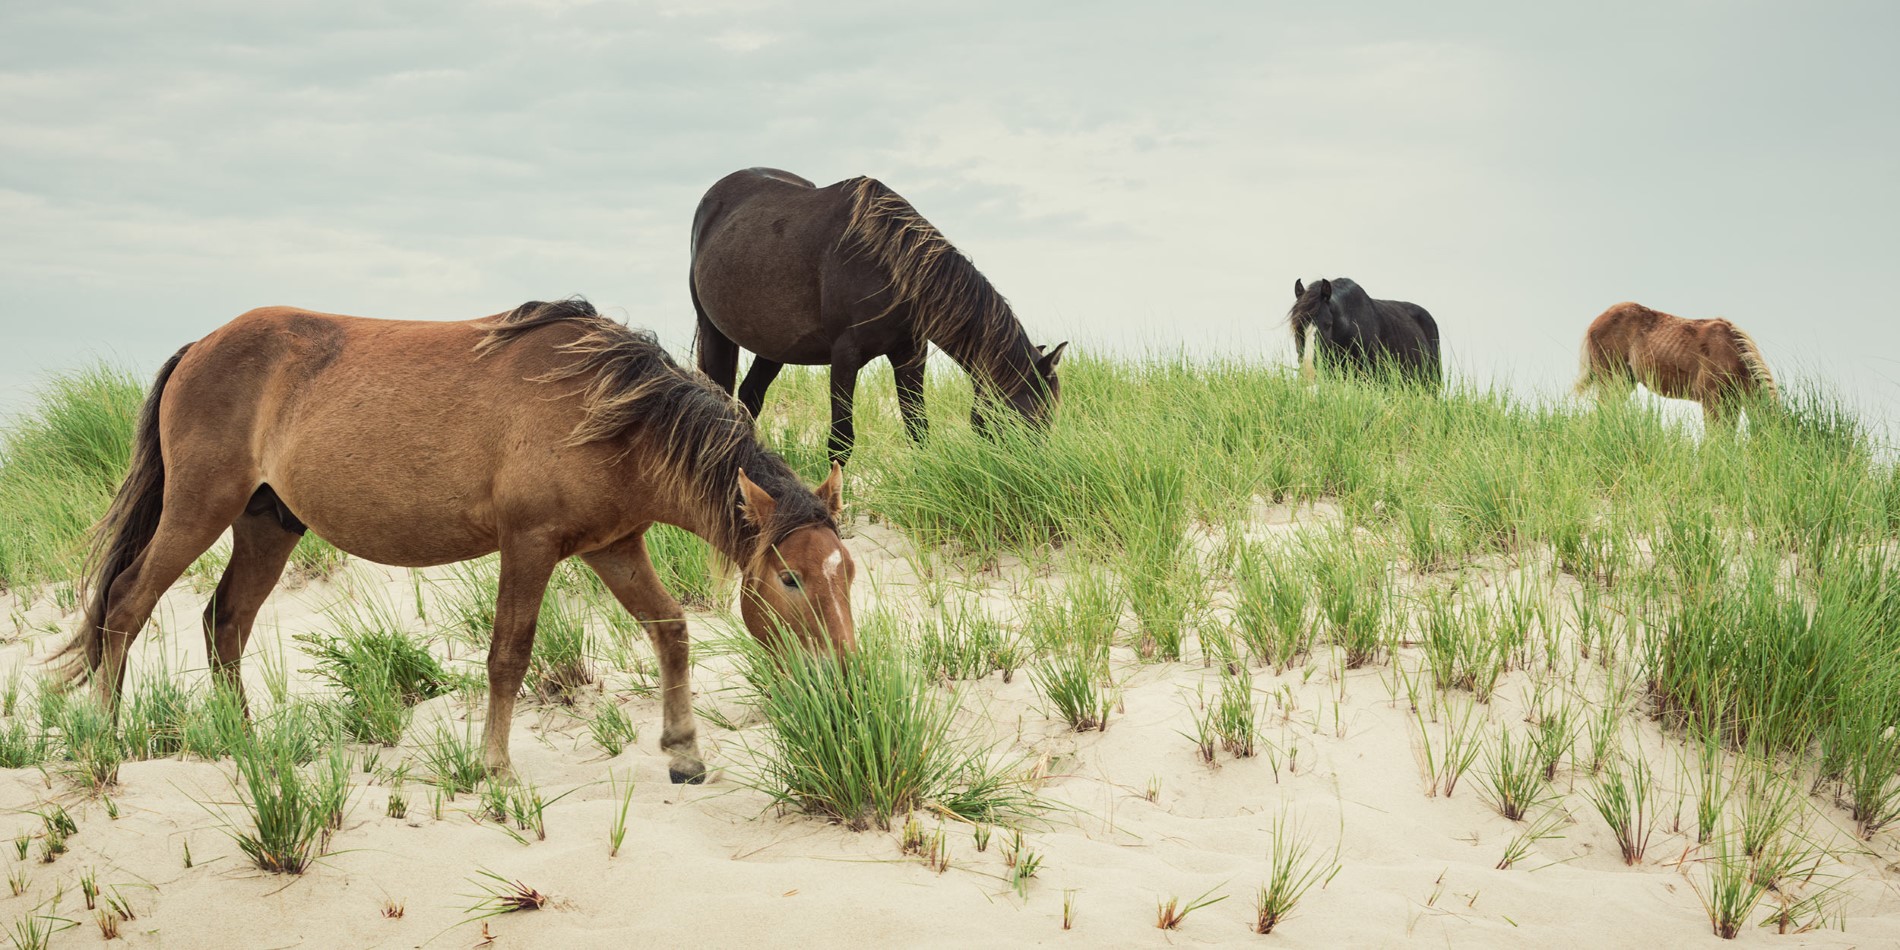 Brown horses eating grass, Sable Island.